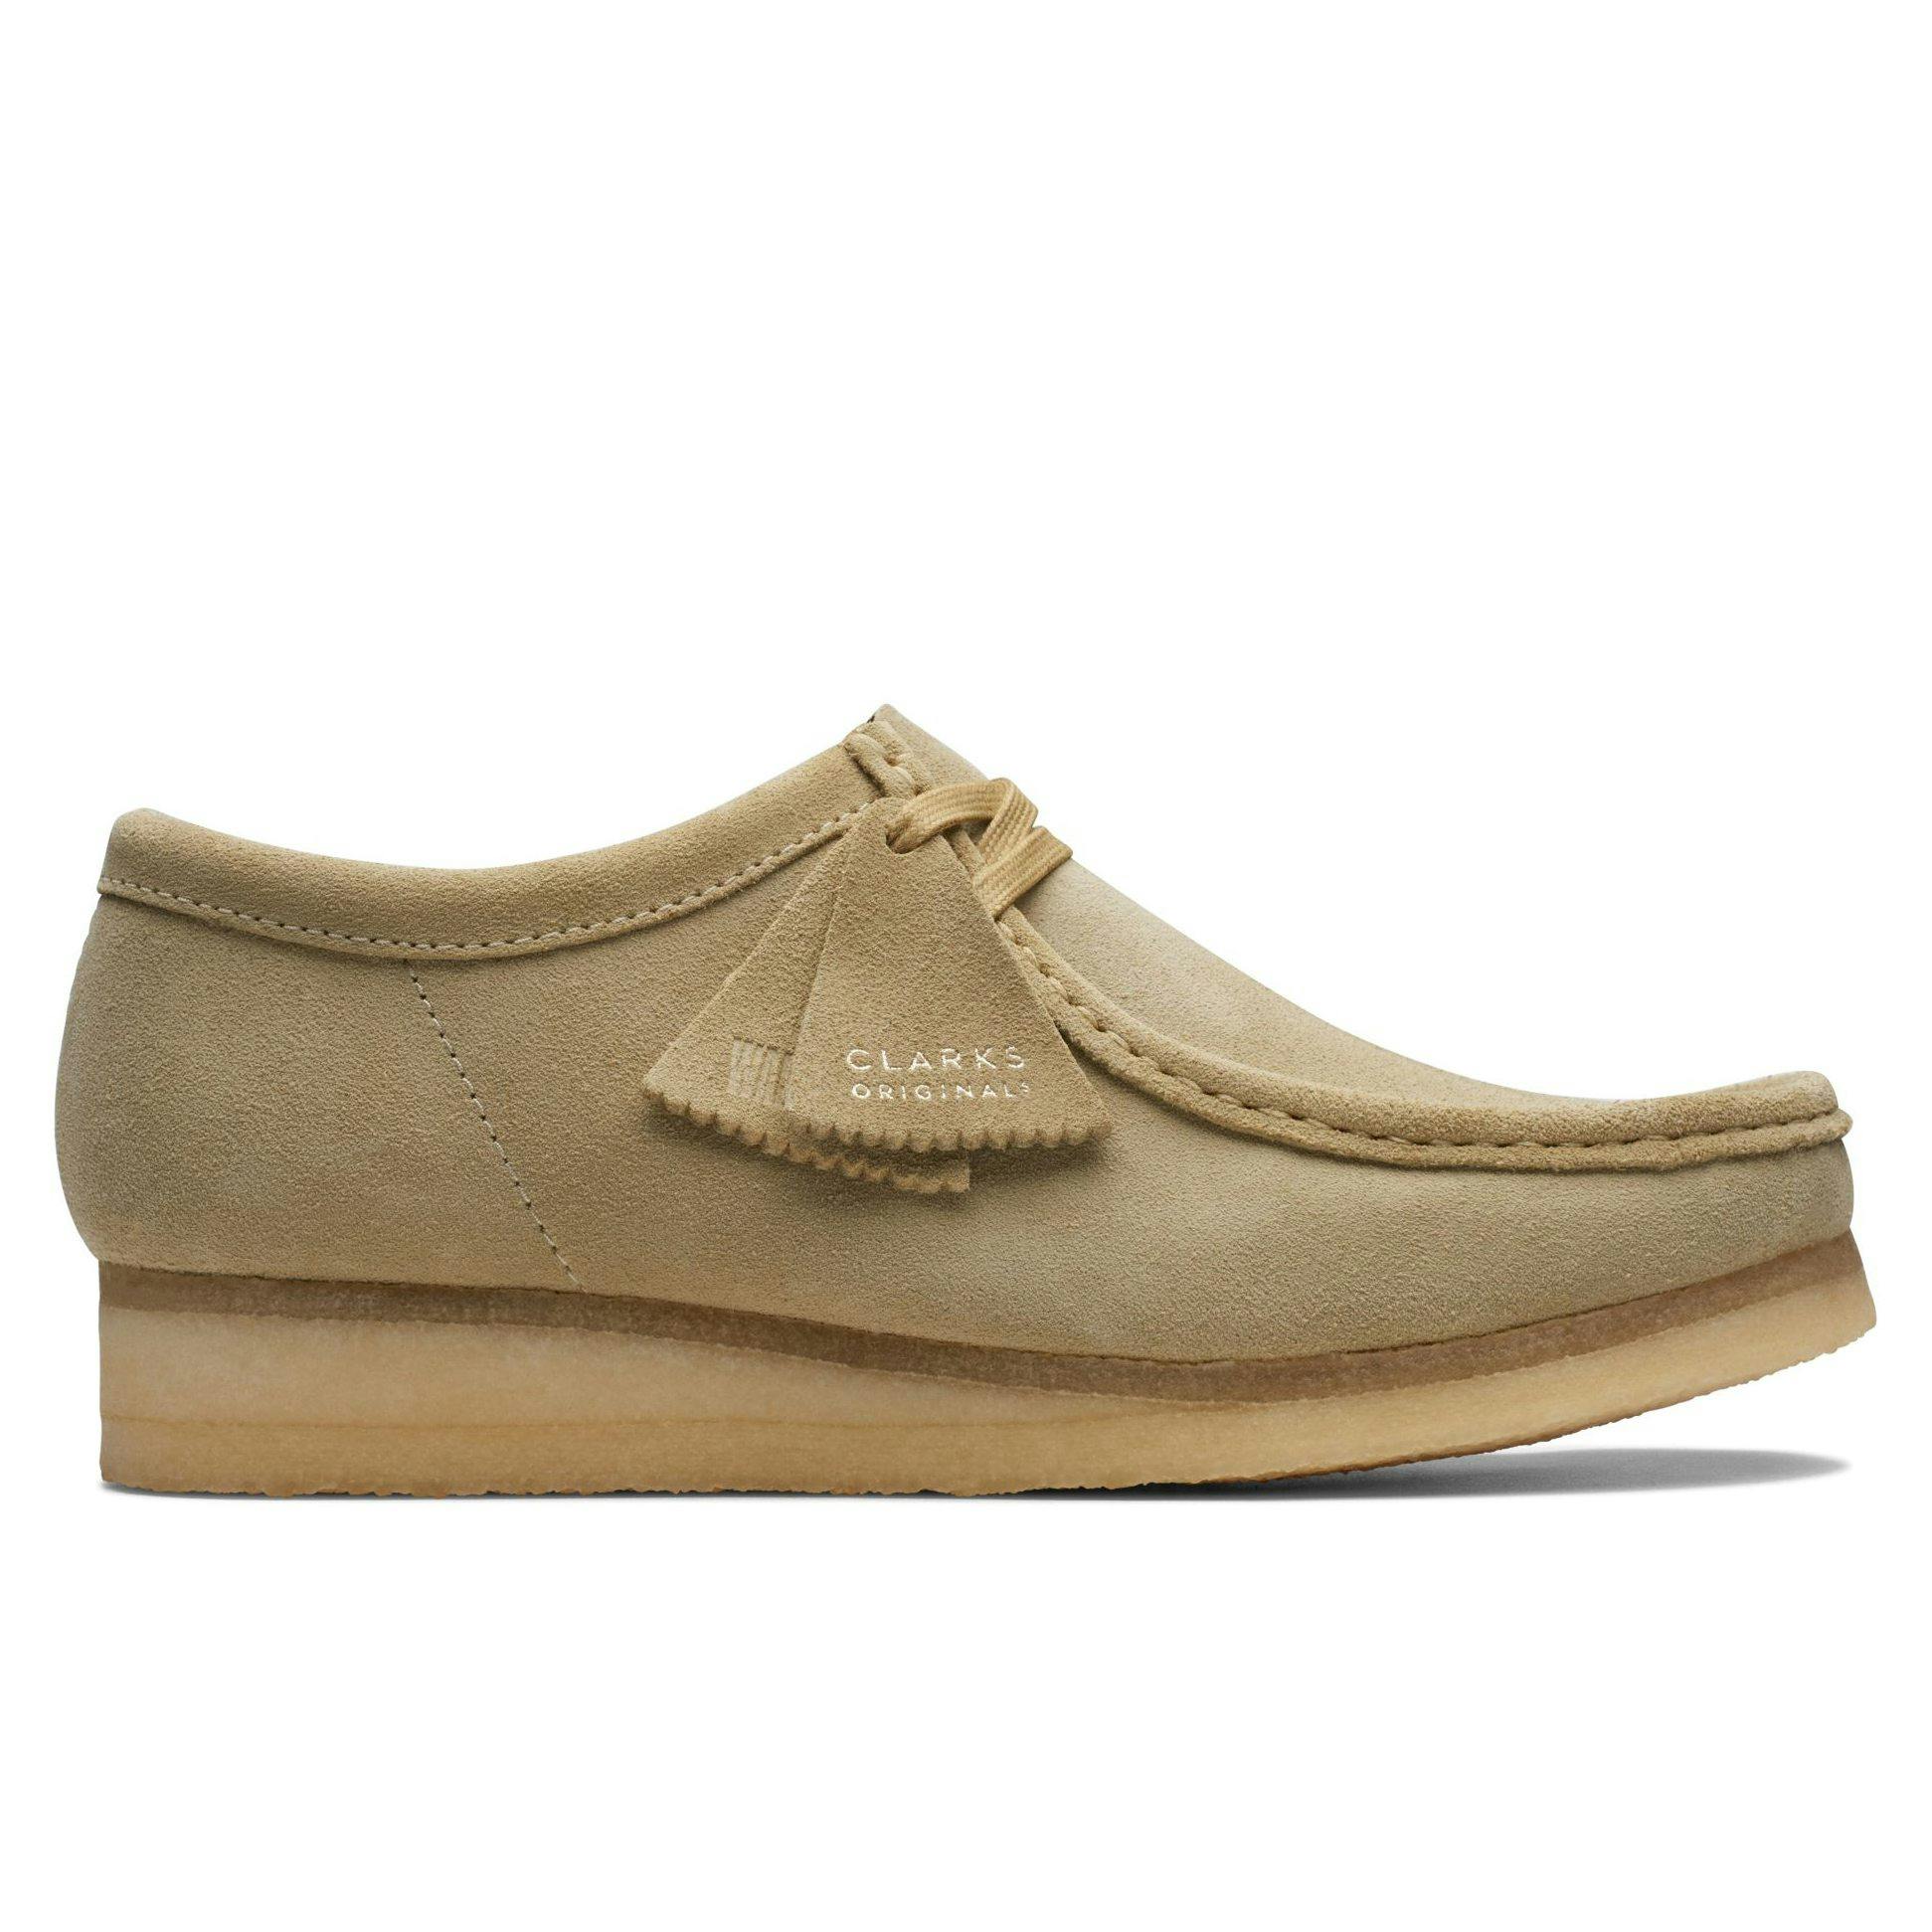 Clarks Wallabee Moc Toe Boot - Maple Suede | Casual Slip On Shoes Huckberry